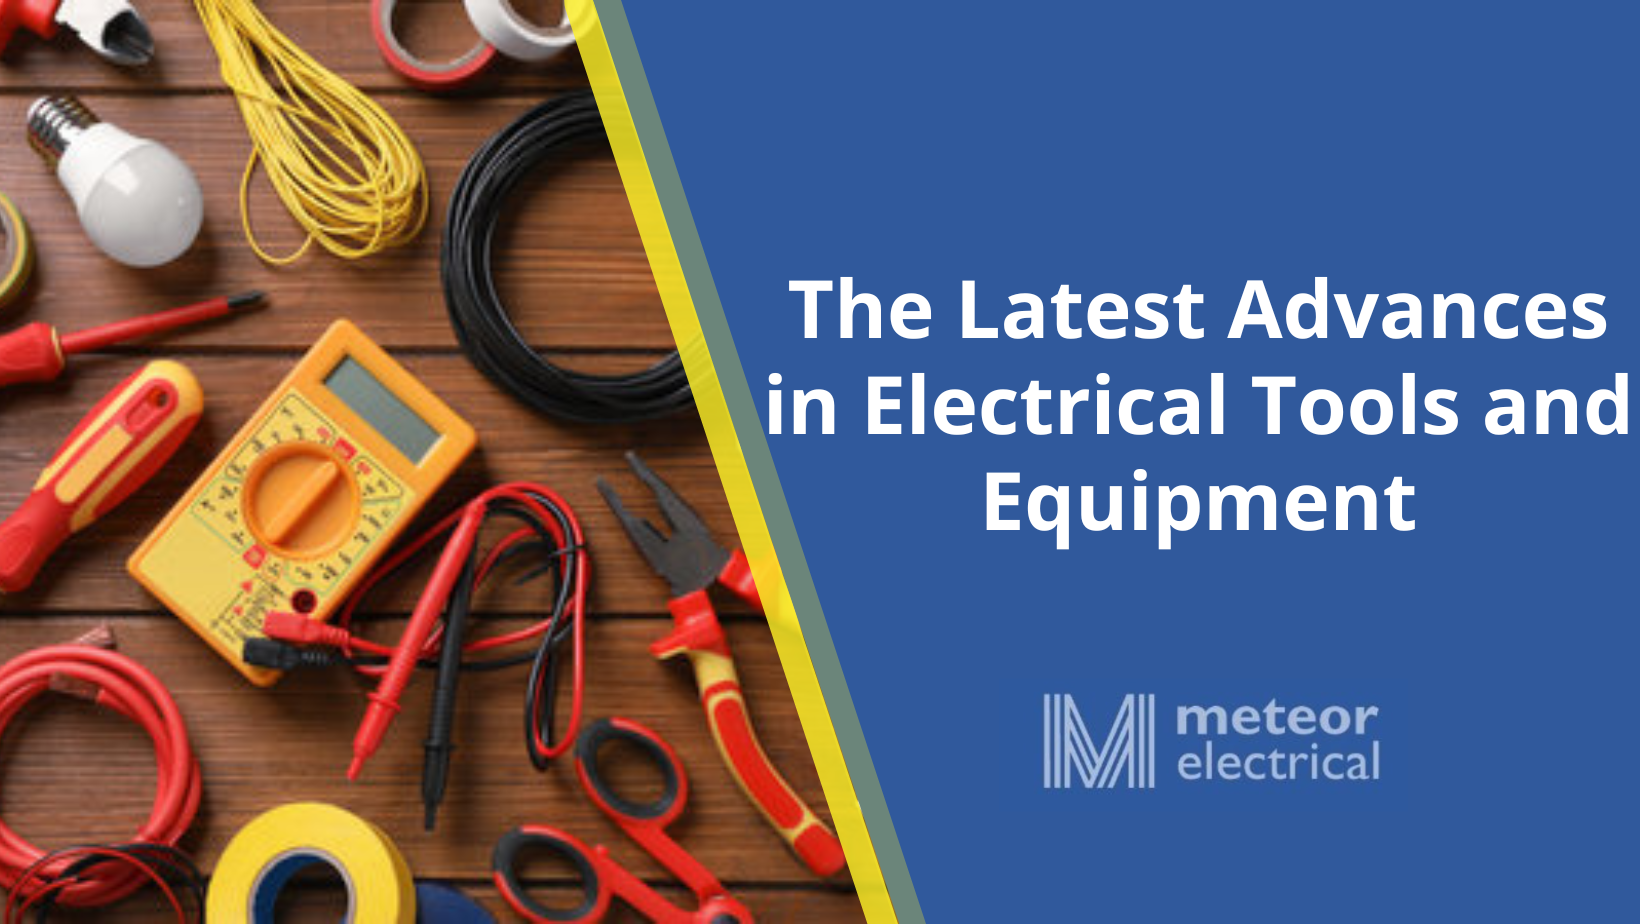 The Latest Advances in Electrical Tools and Equipment